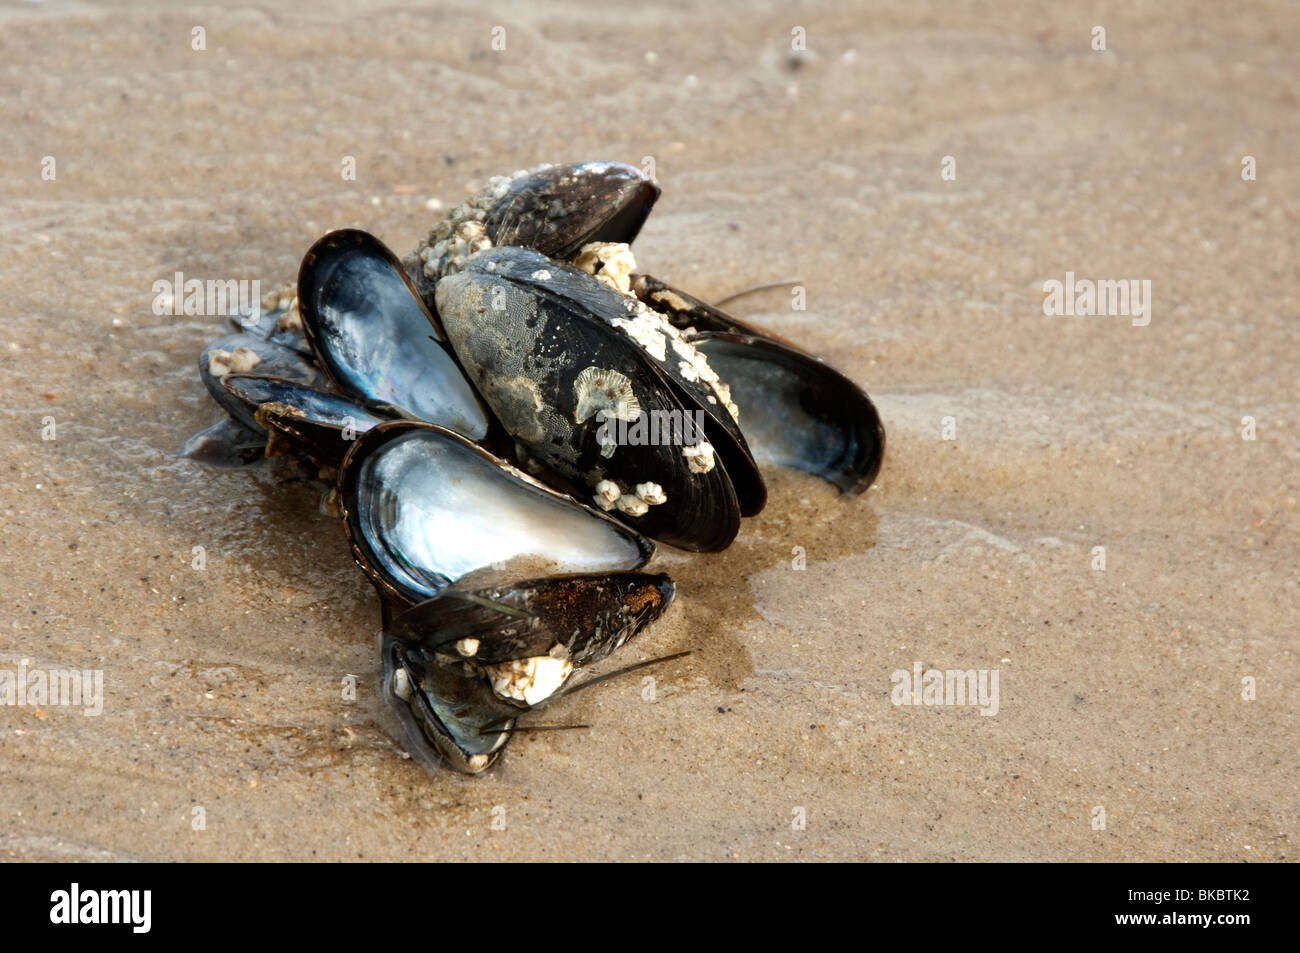 Blue Mussel, Common Mussel (Mytilus edulis). Several individuals attached to a stone together with empty shells. Stock Photo